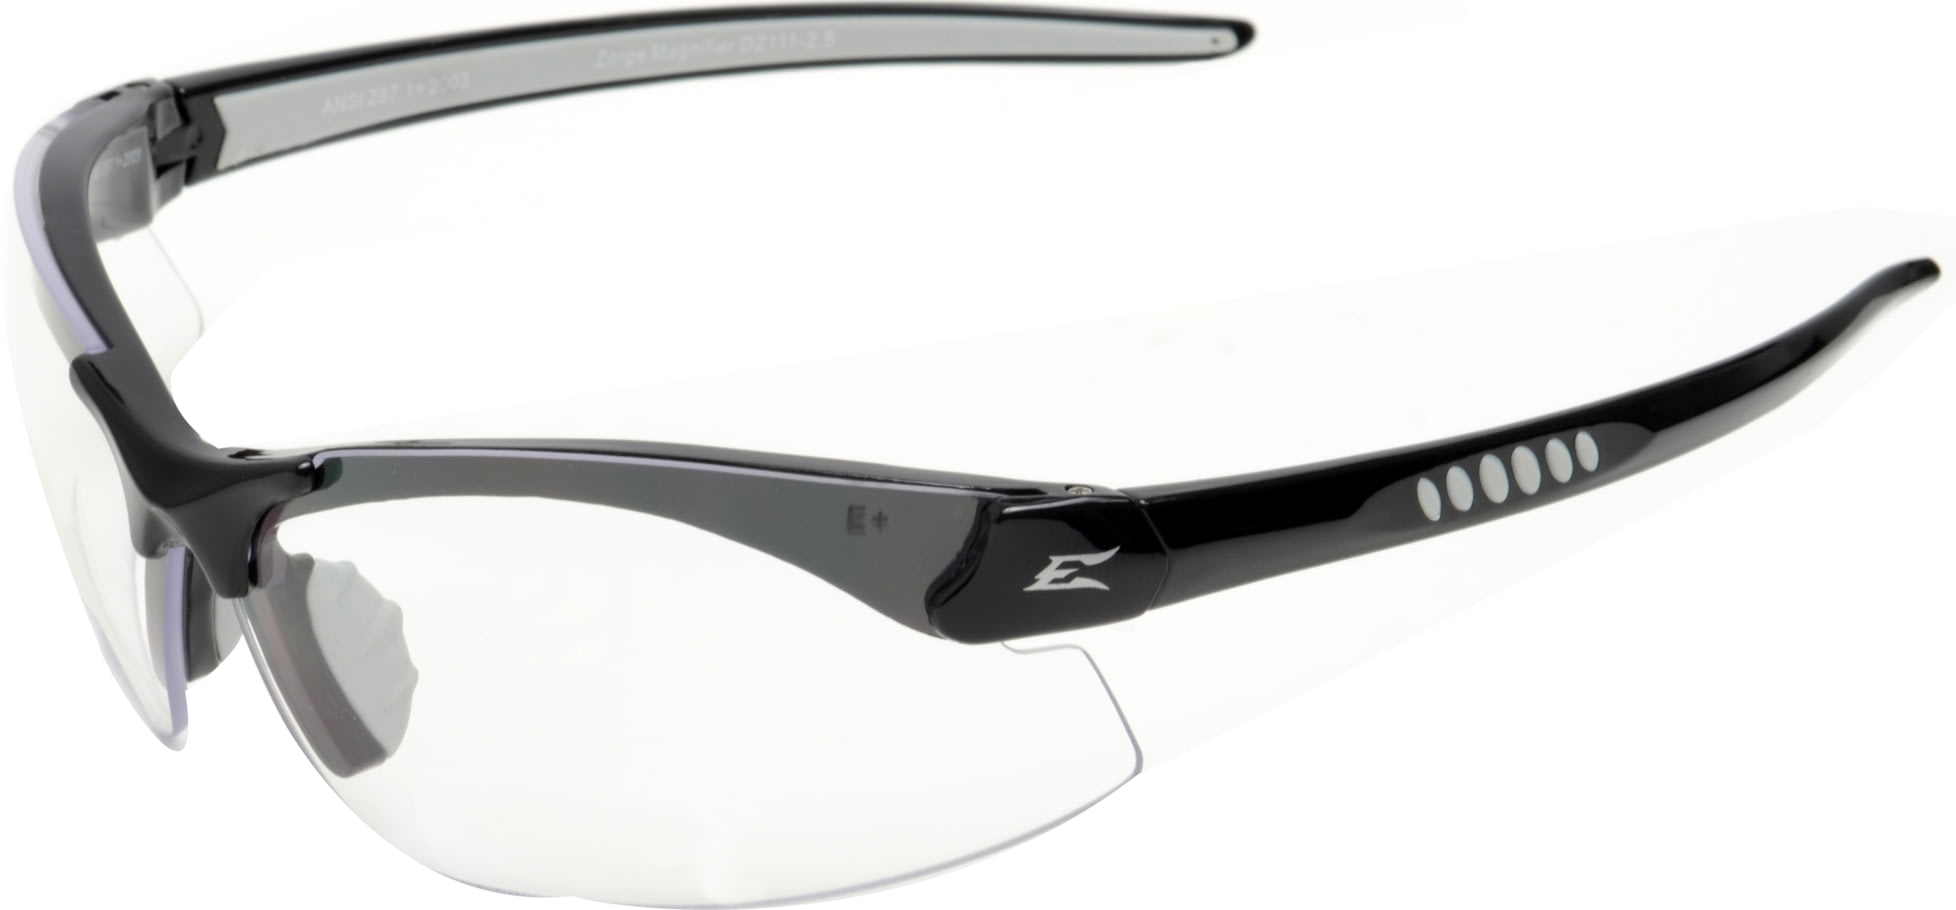 Edge Safety Eyewear Zorge Safety Glasses 4 Star Rating Free Shipping Over 49